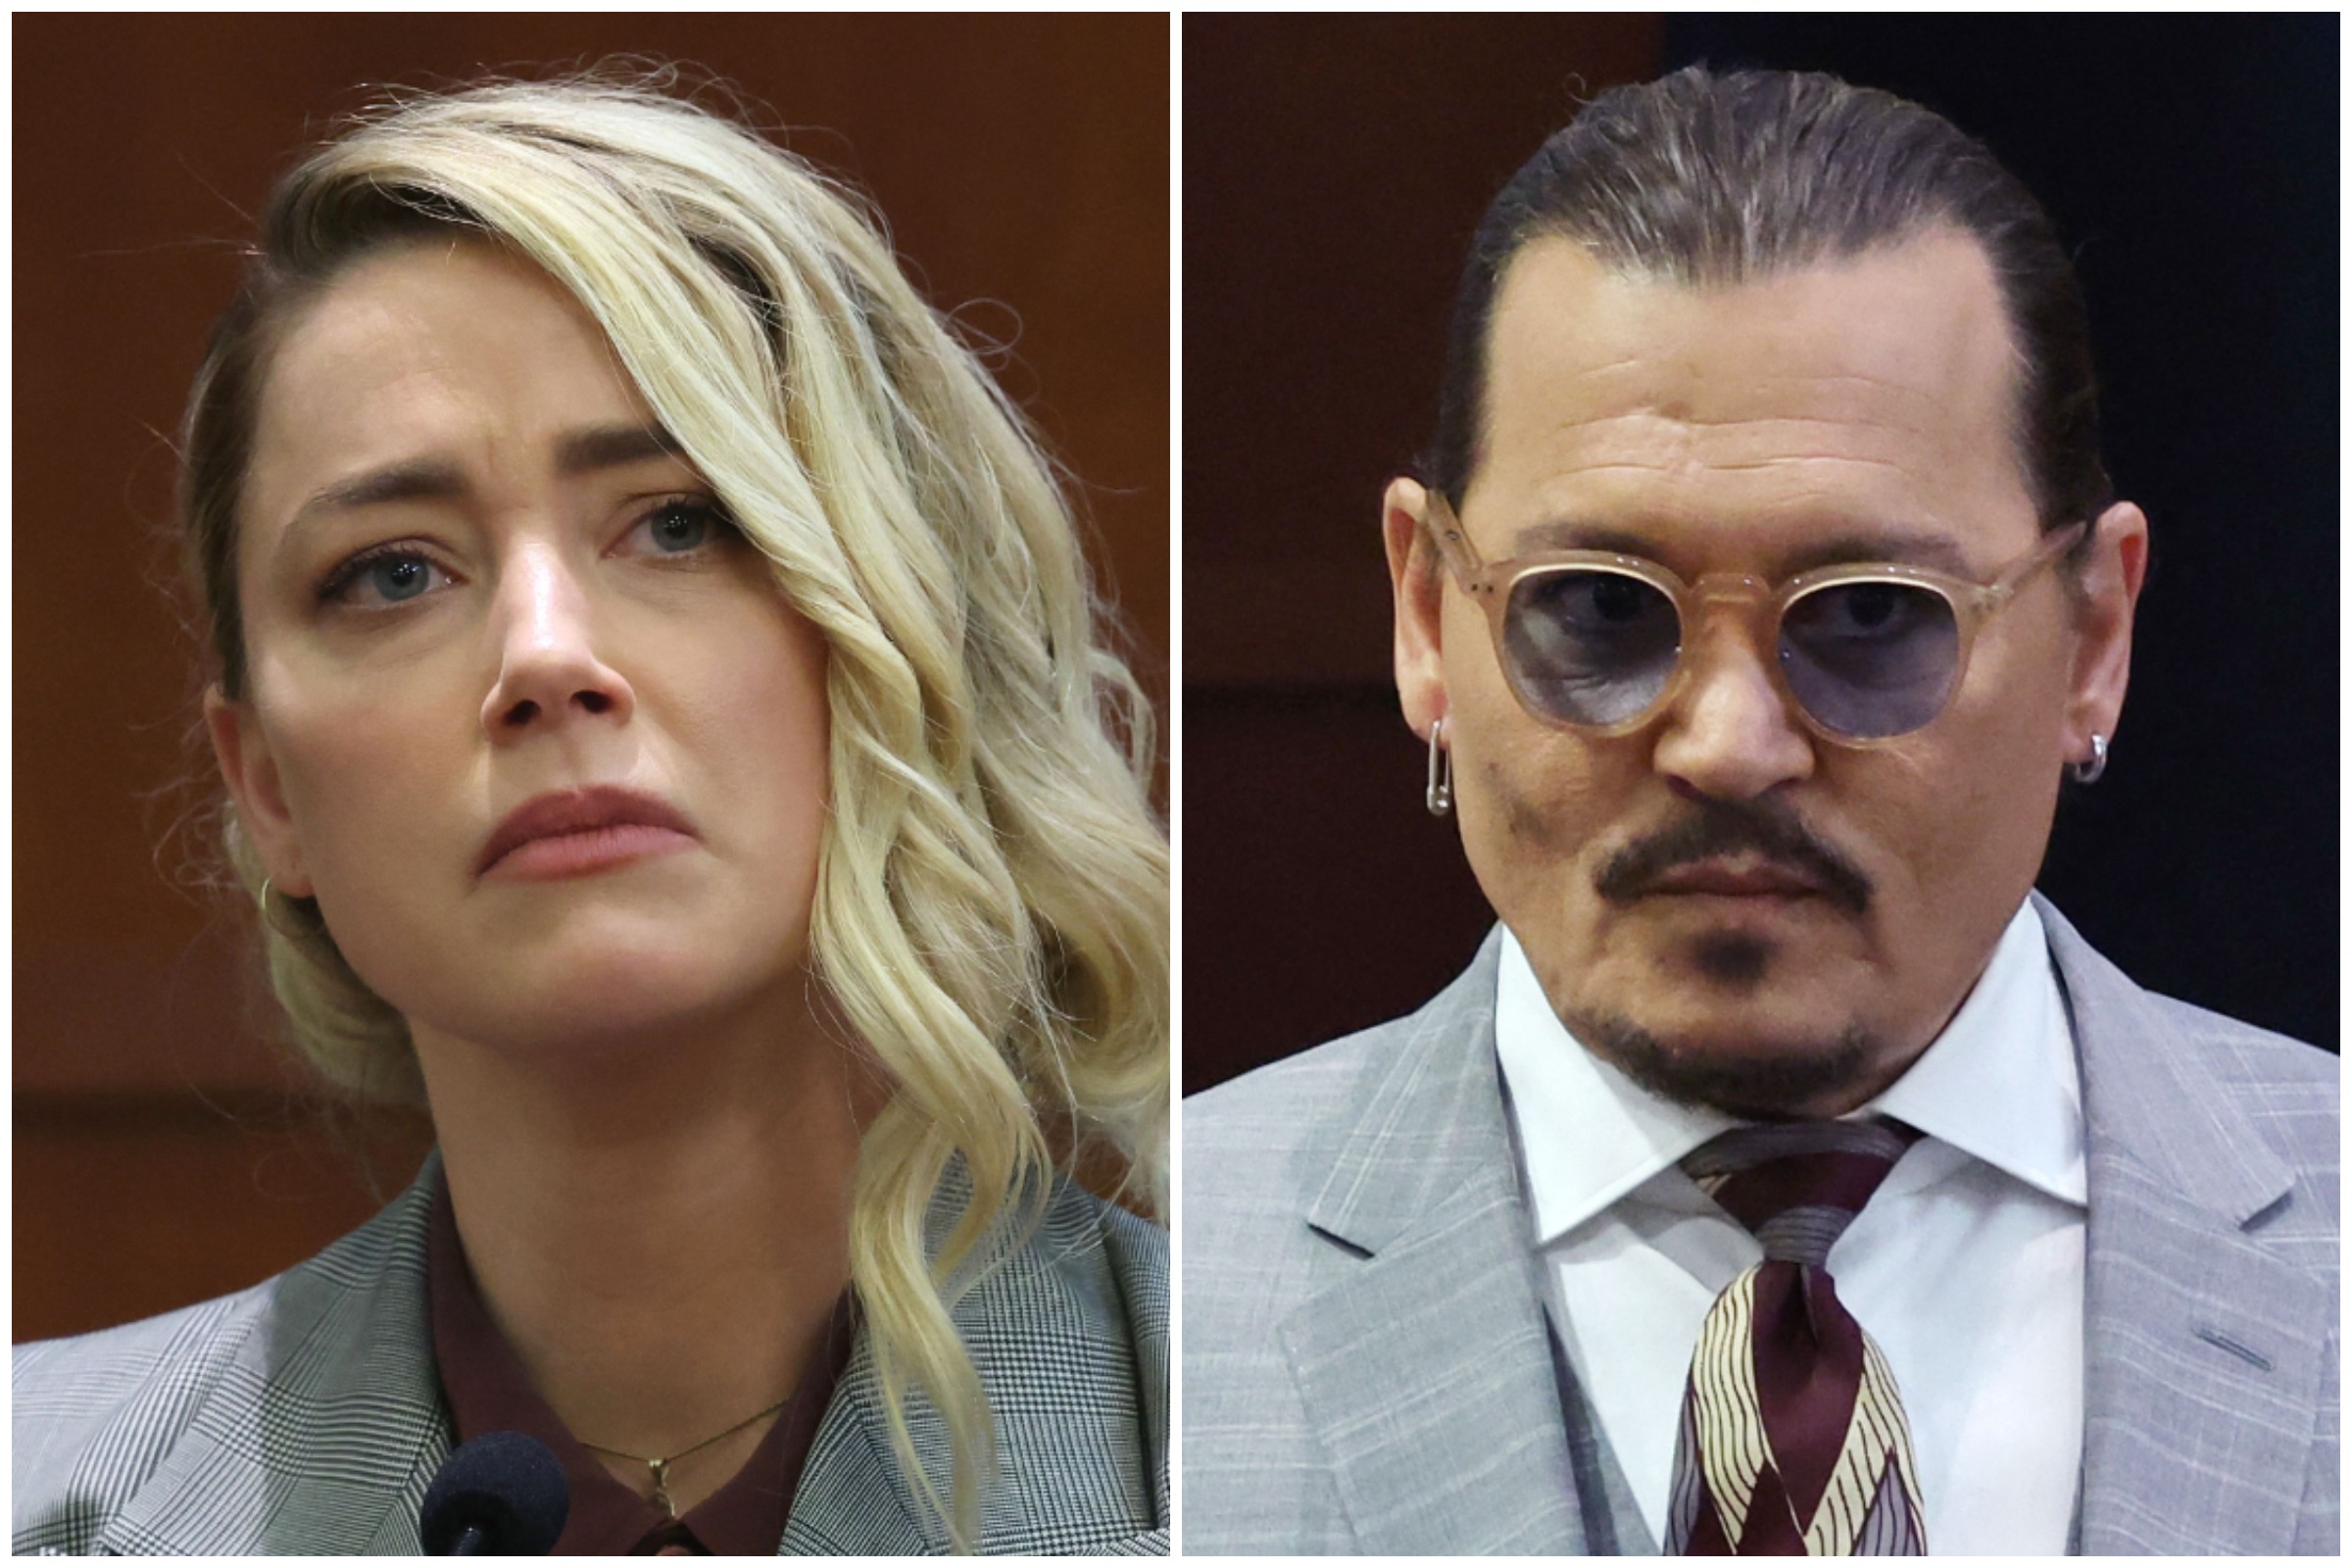 Jhonny Forced Sex - Johnny Depp, Amber Heard Trial Coverage: If No Friday Verdict, Jury to  Reconvene After Holiday